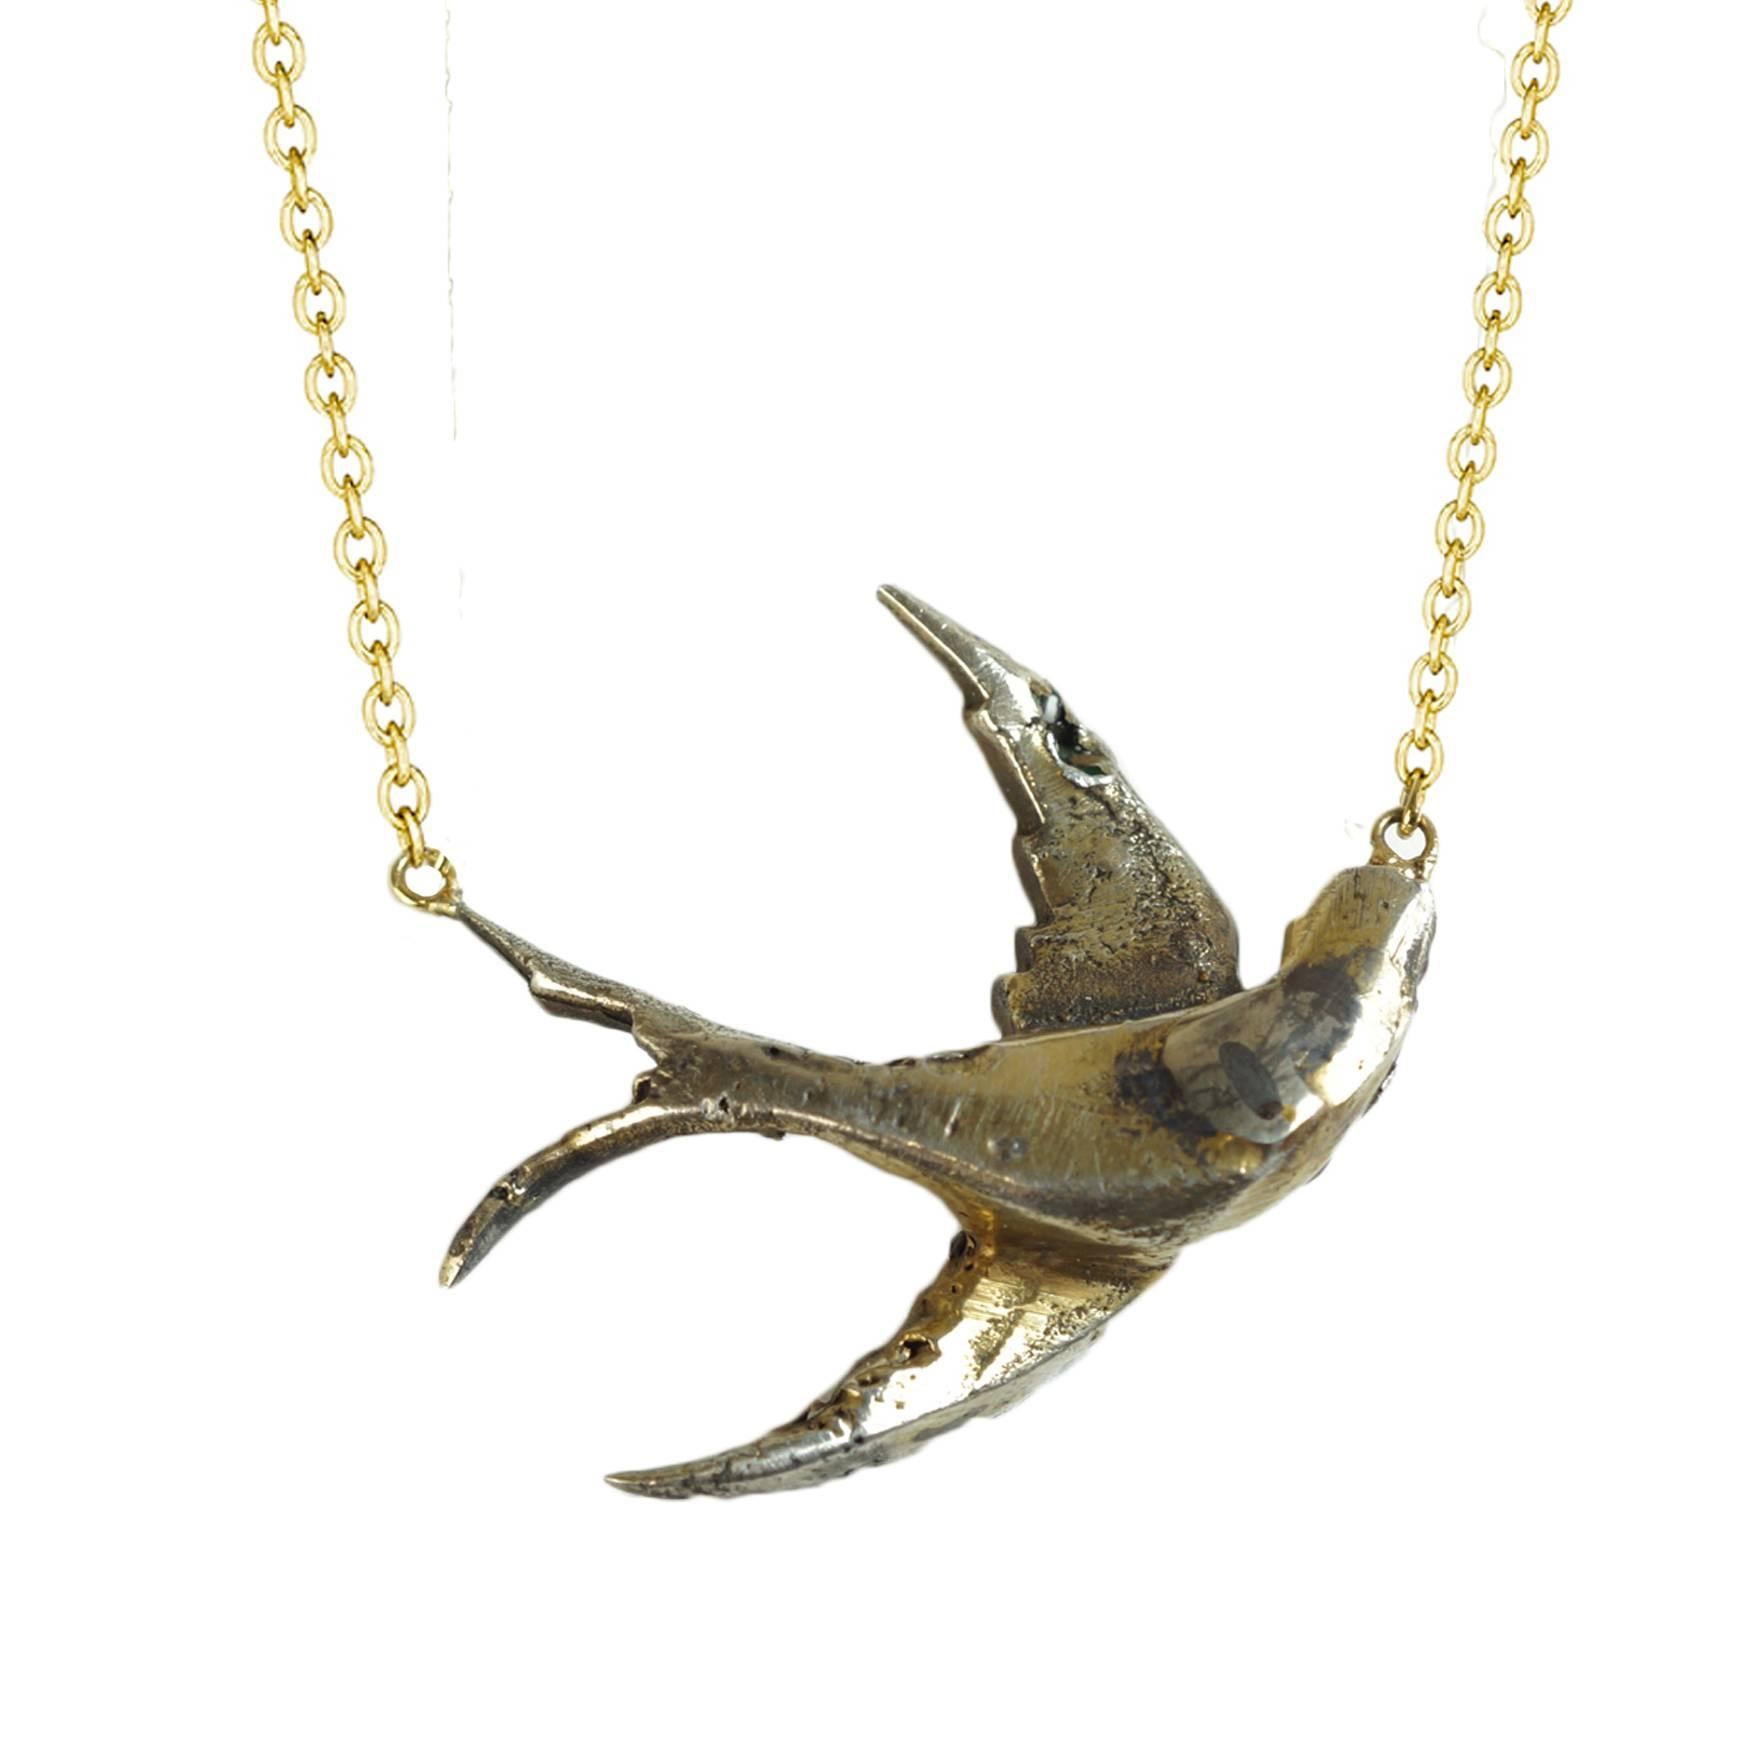 A precious swallow bird in flight necklace form the Victorian Era!!  Antique and Vintage jewelry can have a special language all its own.  Feelings, emotion and sentimentality are all apart of jewelry design from this time frame.  The swallow who is